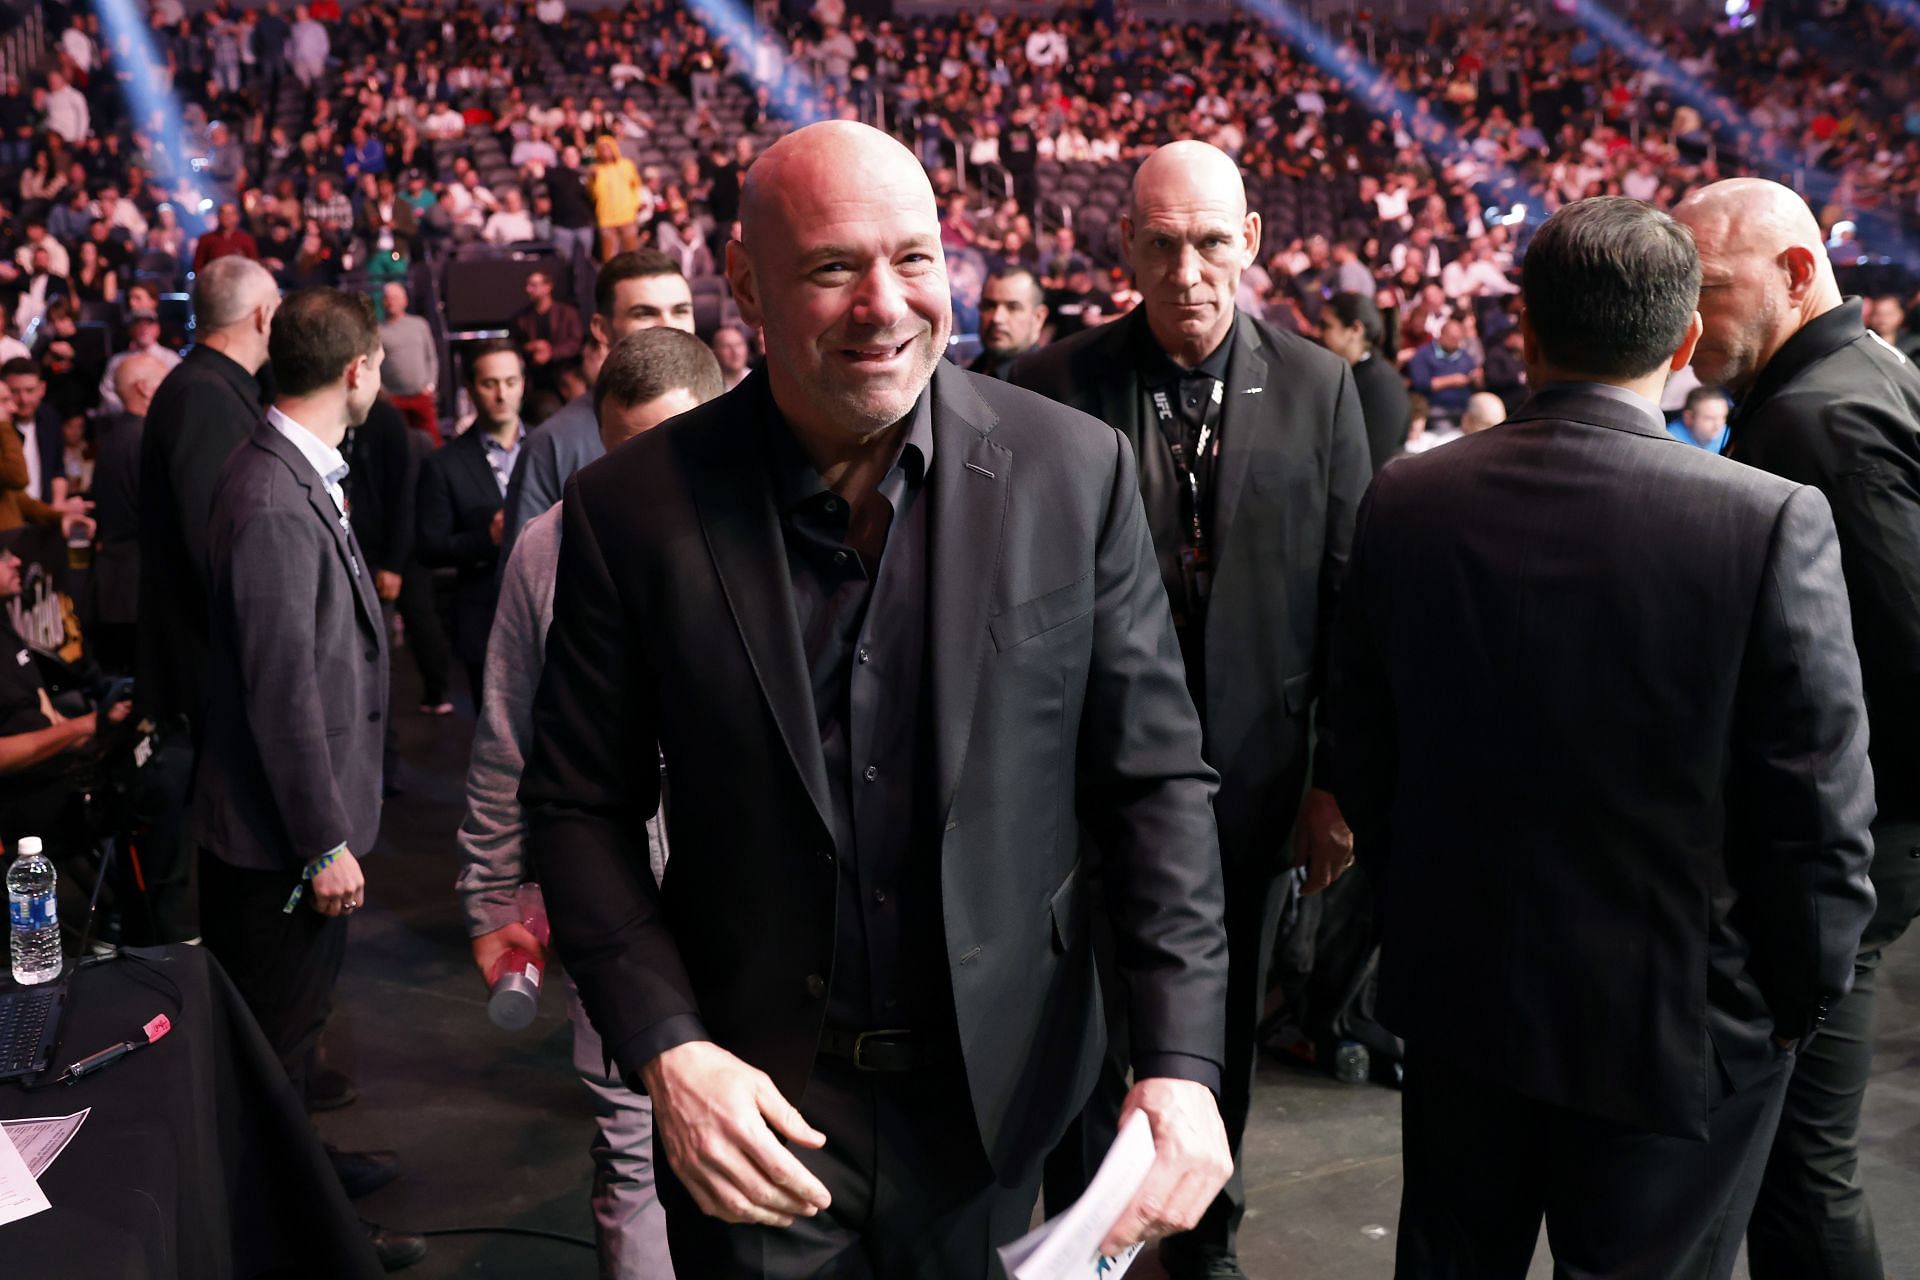 Dana White has embraced slap fighting completely, arguably to the detriment of the UFC